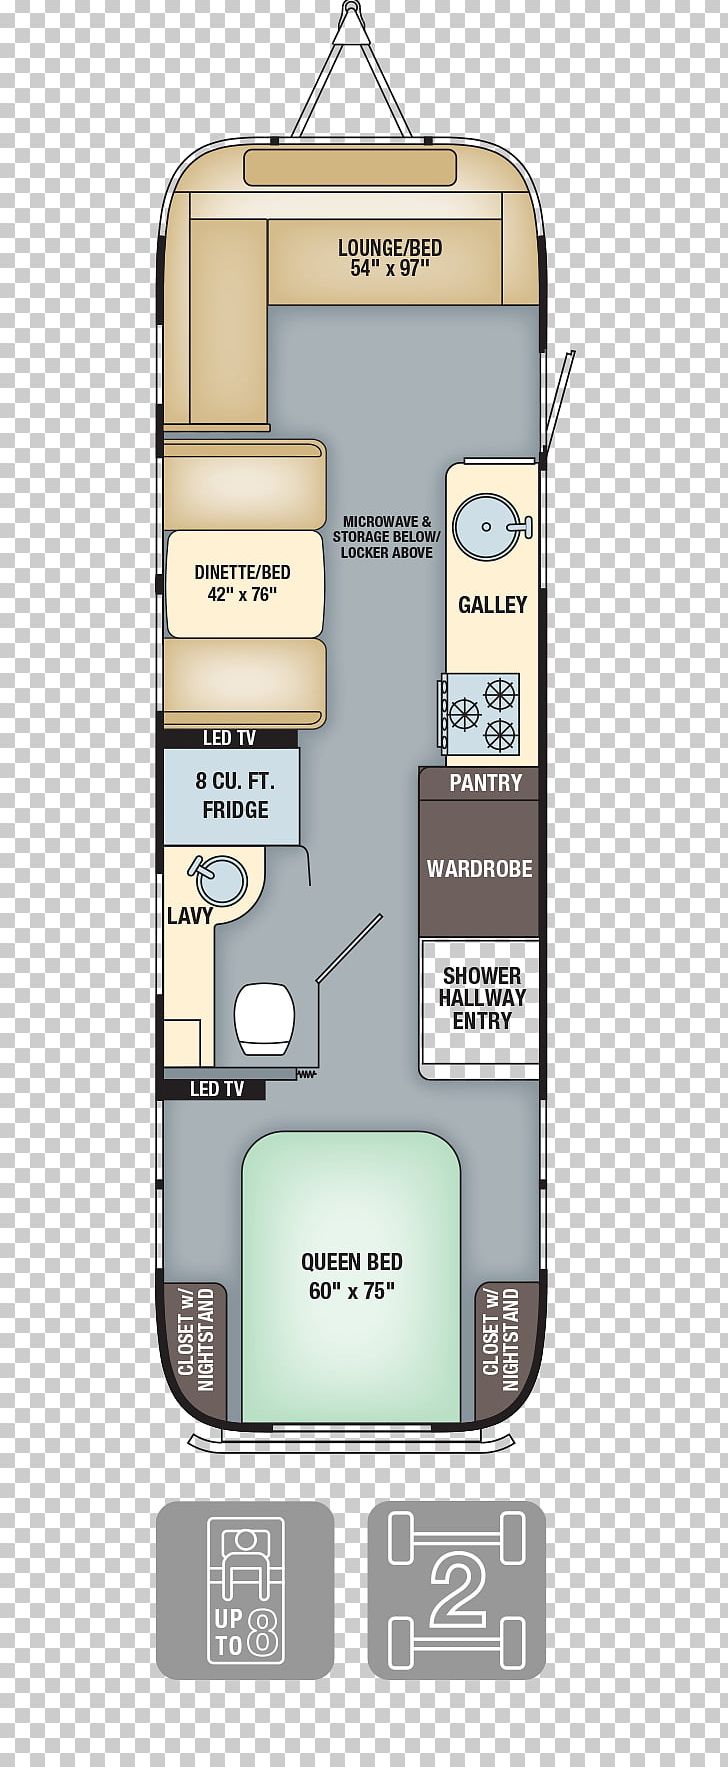 Airstream Caravan Floor Plan Interior Design Services Campervans PNG, Clipart, Airstream, Architectural Plan, Architecture, Bed Plan, Blueprint Free PNG Download